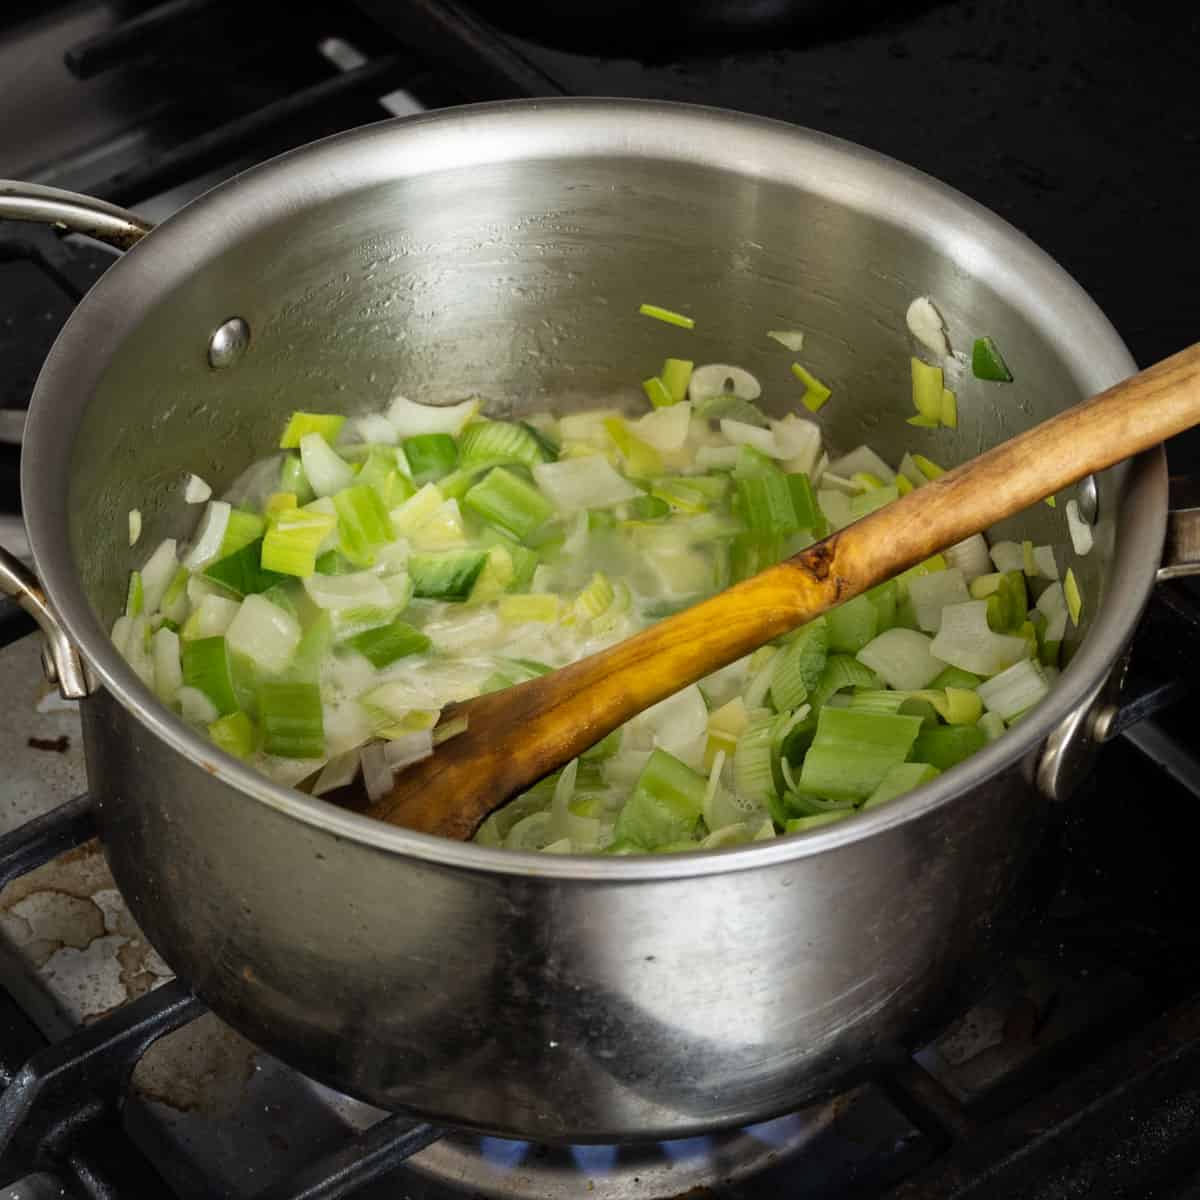 sweating onion, celery and leek in oil 